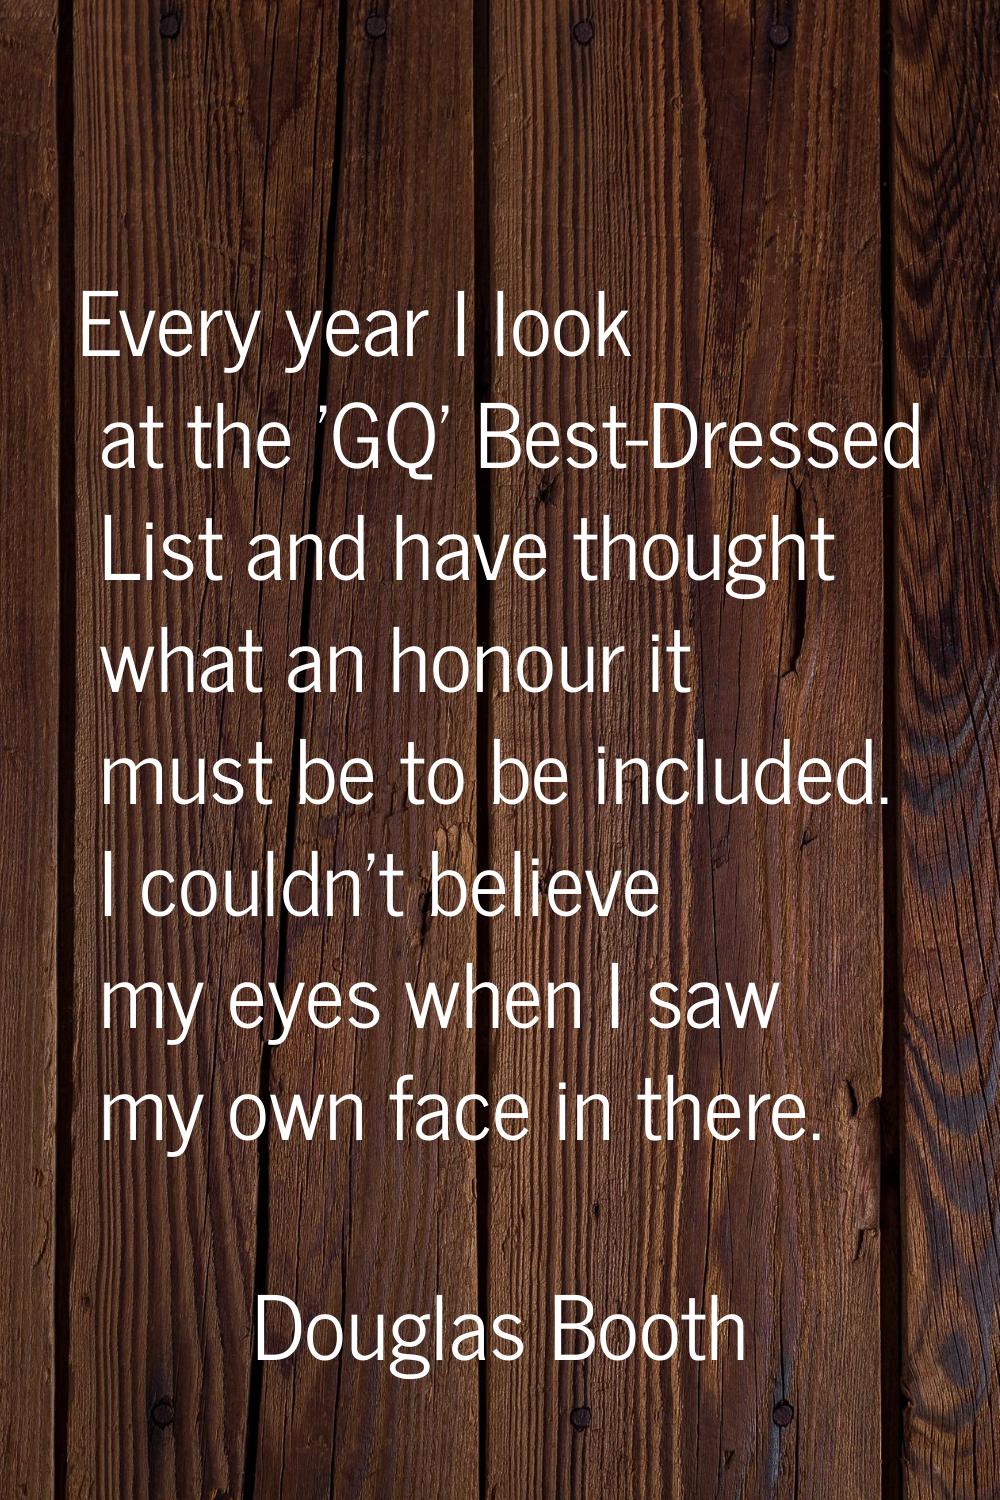 Every year I look at the 'GQ' Best-Dressed List and have thought what an honour it must be to be in